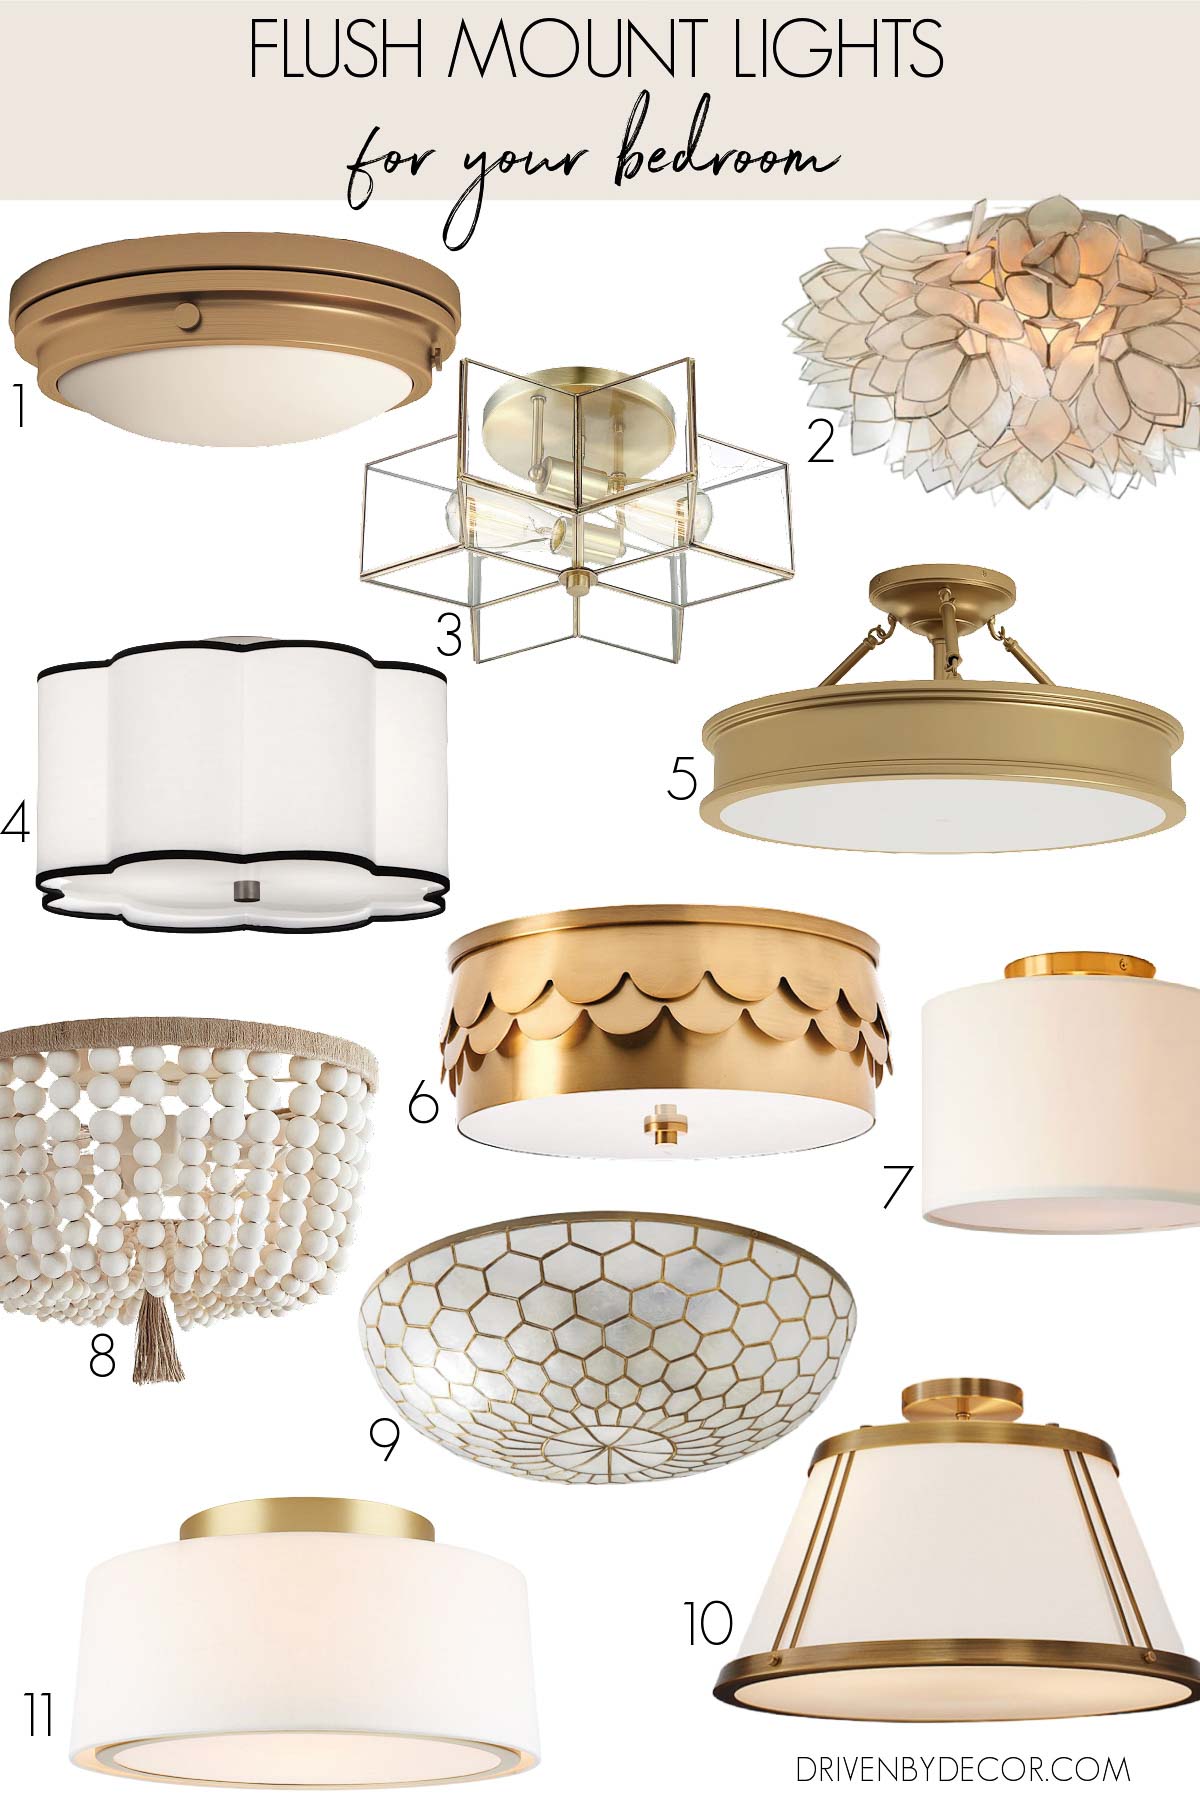 6 Tips for Decorating with Lamps